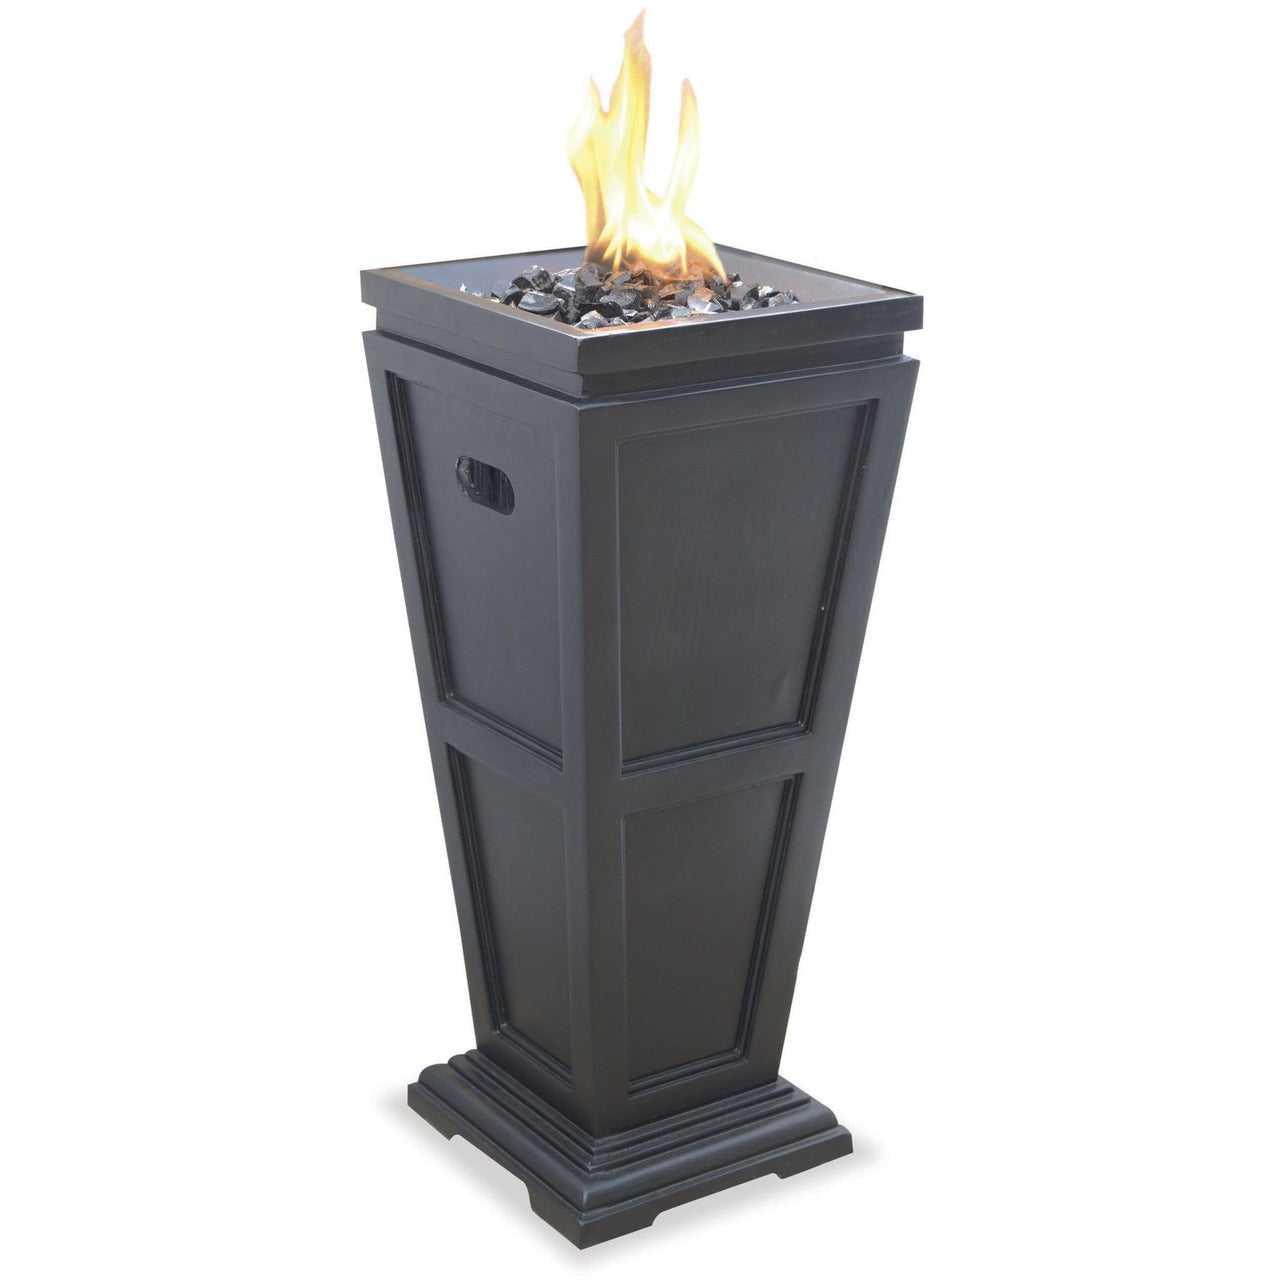 Endless Summer LP Gas Outdoor Fire Column, Large In Slate Finish - GLT1332SP - Fire Pit Stock